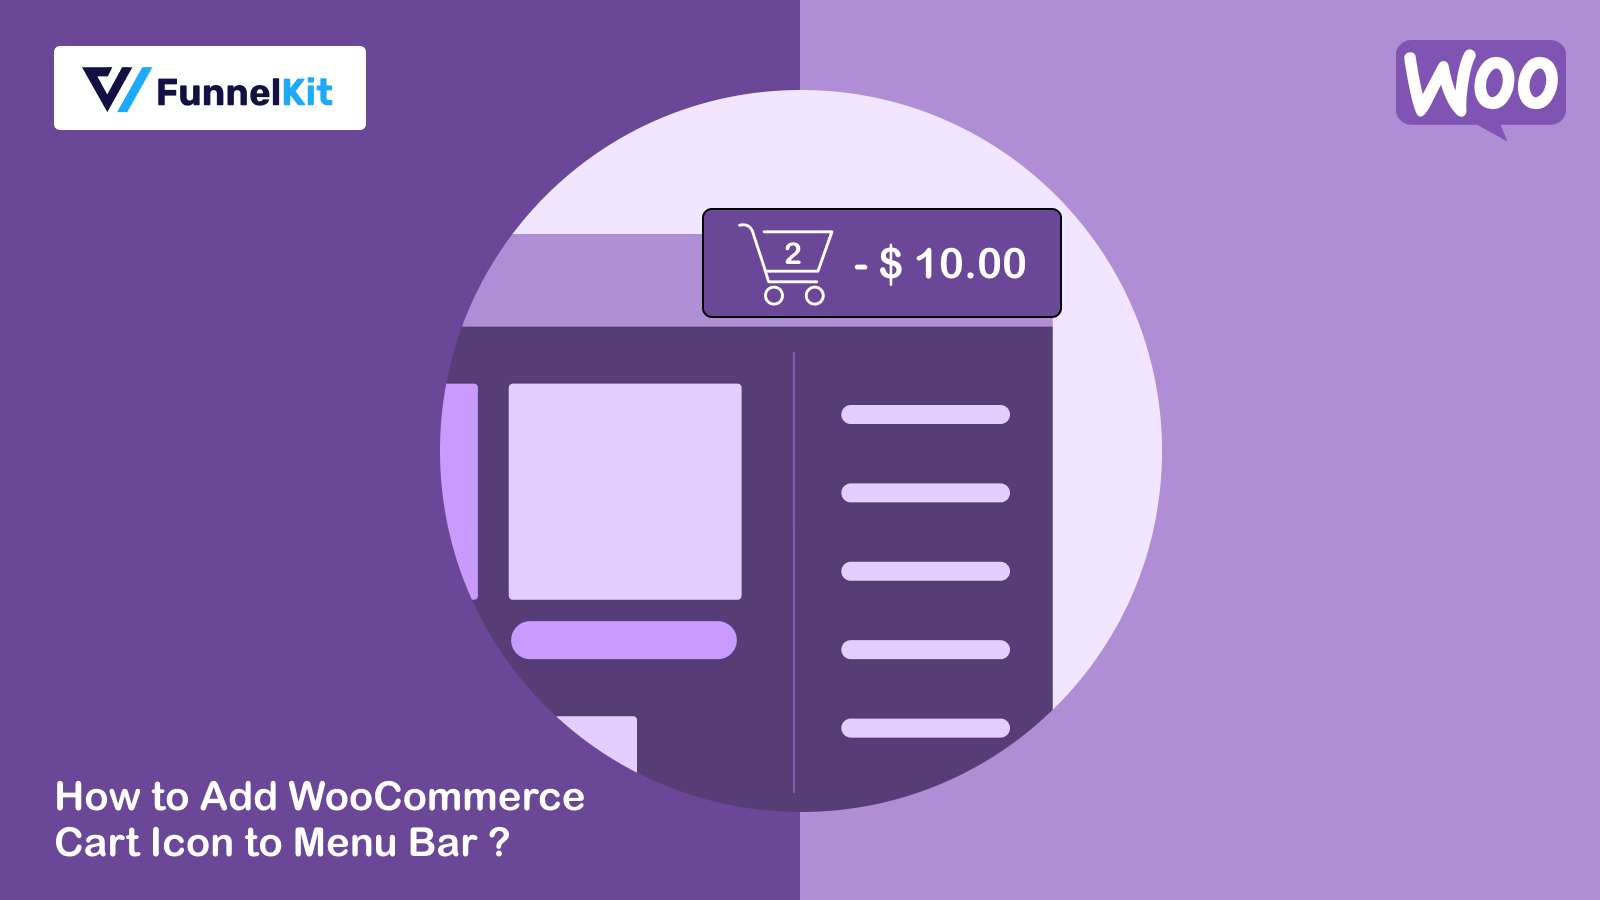 How to Add WooCommerce Cart Icon to Menu Bar?